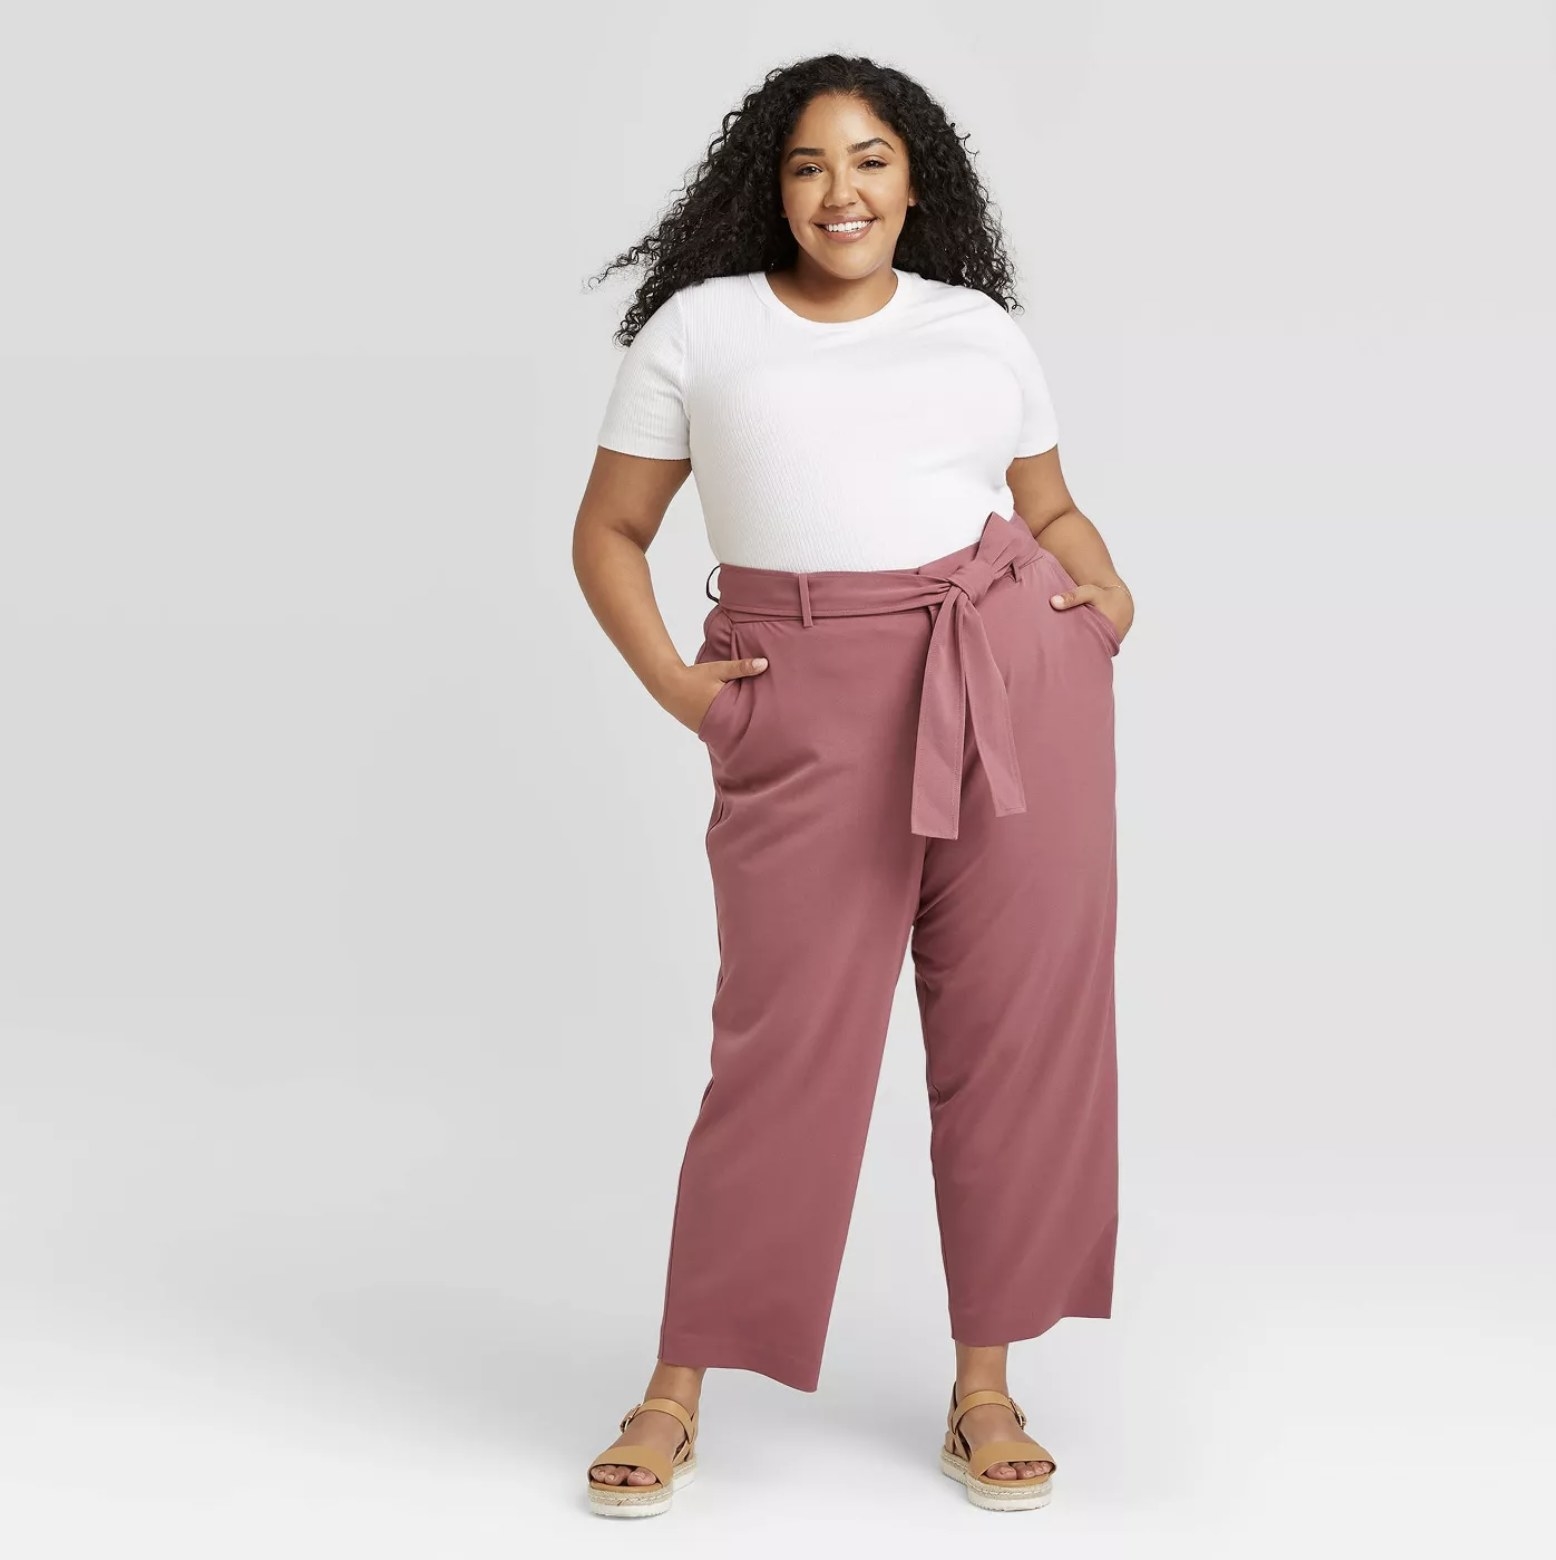 Model wears pink tie-waist straight pants with a white top